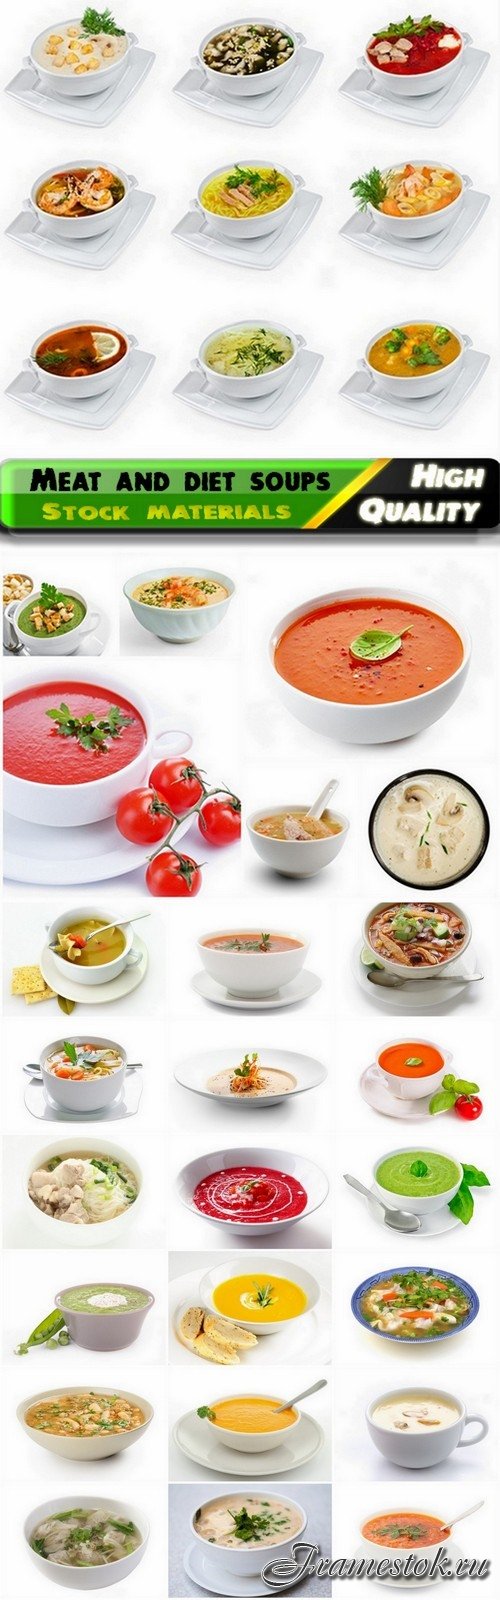 Meat and diet soups on white - 25 HQ Jpg